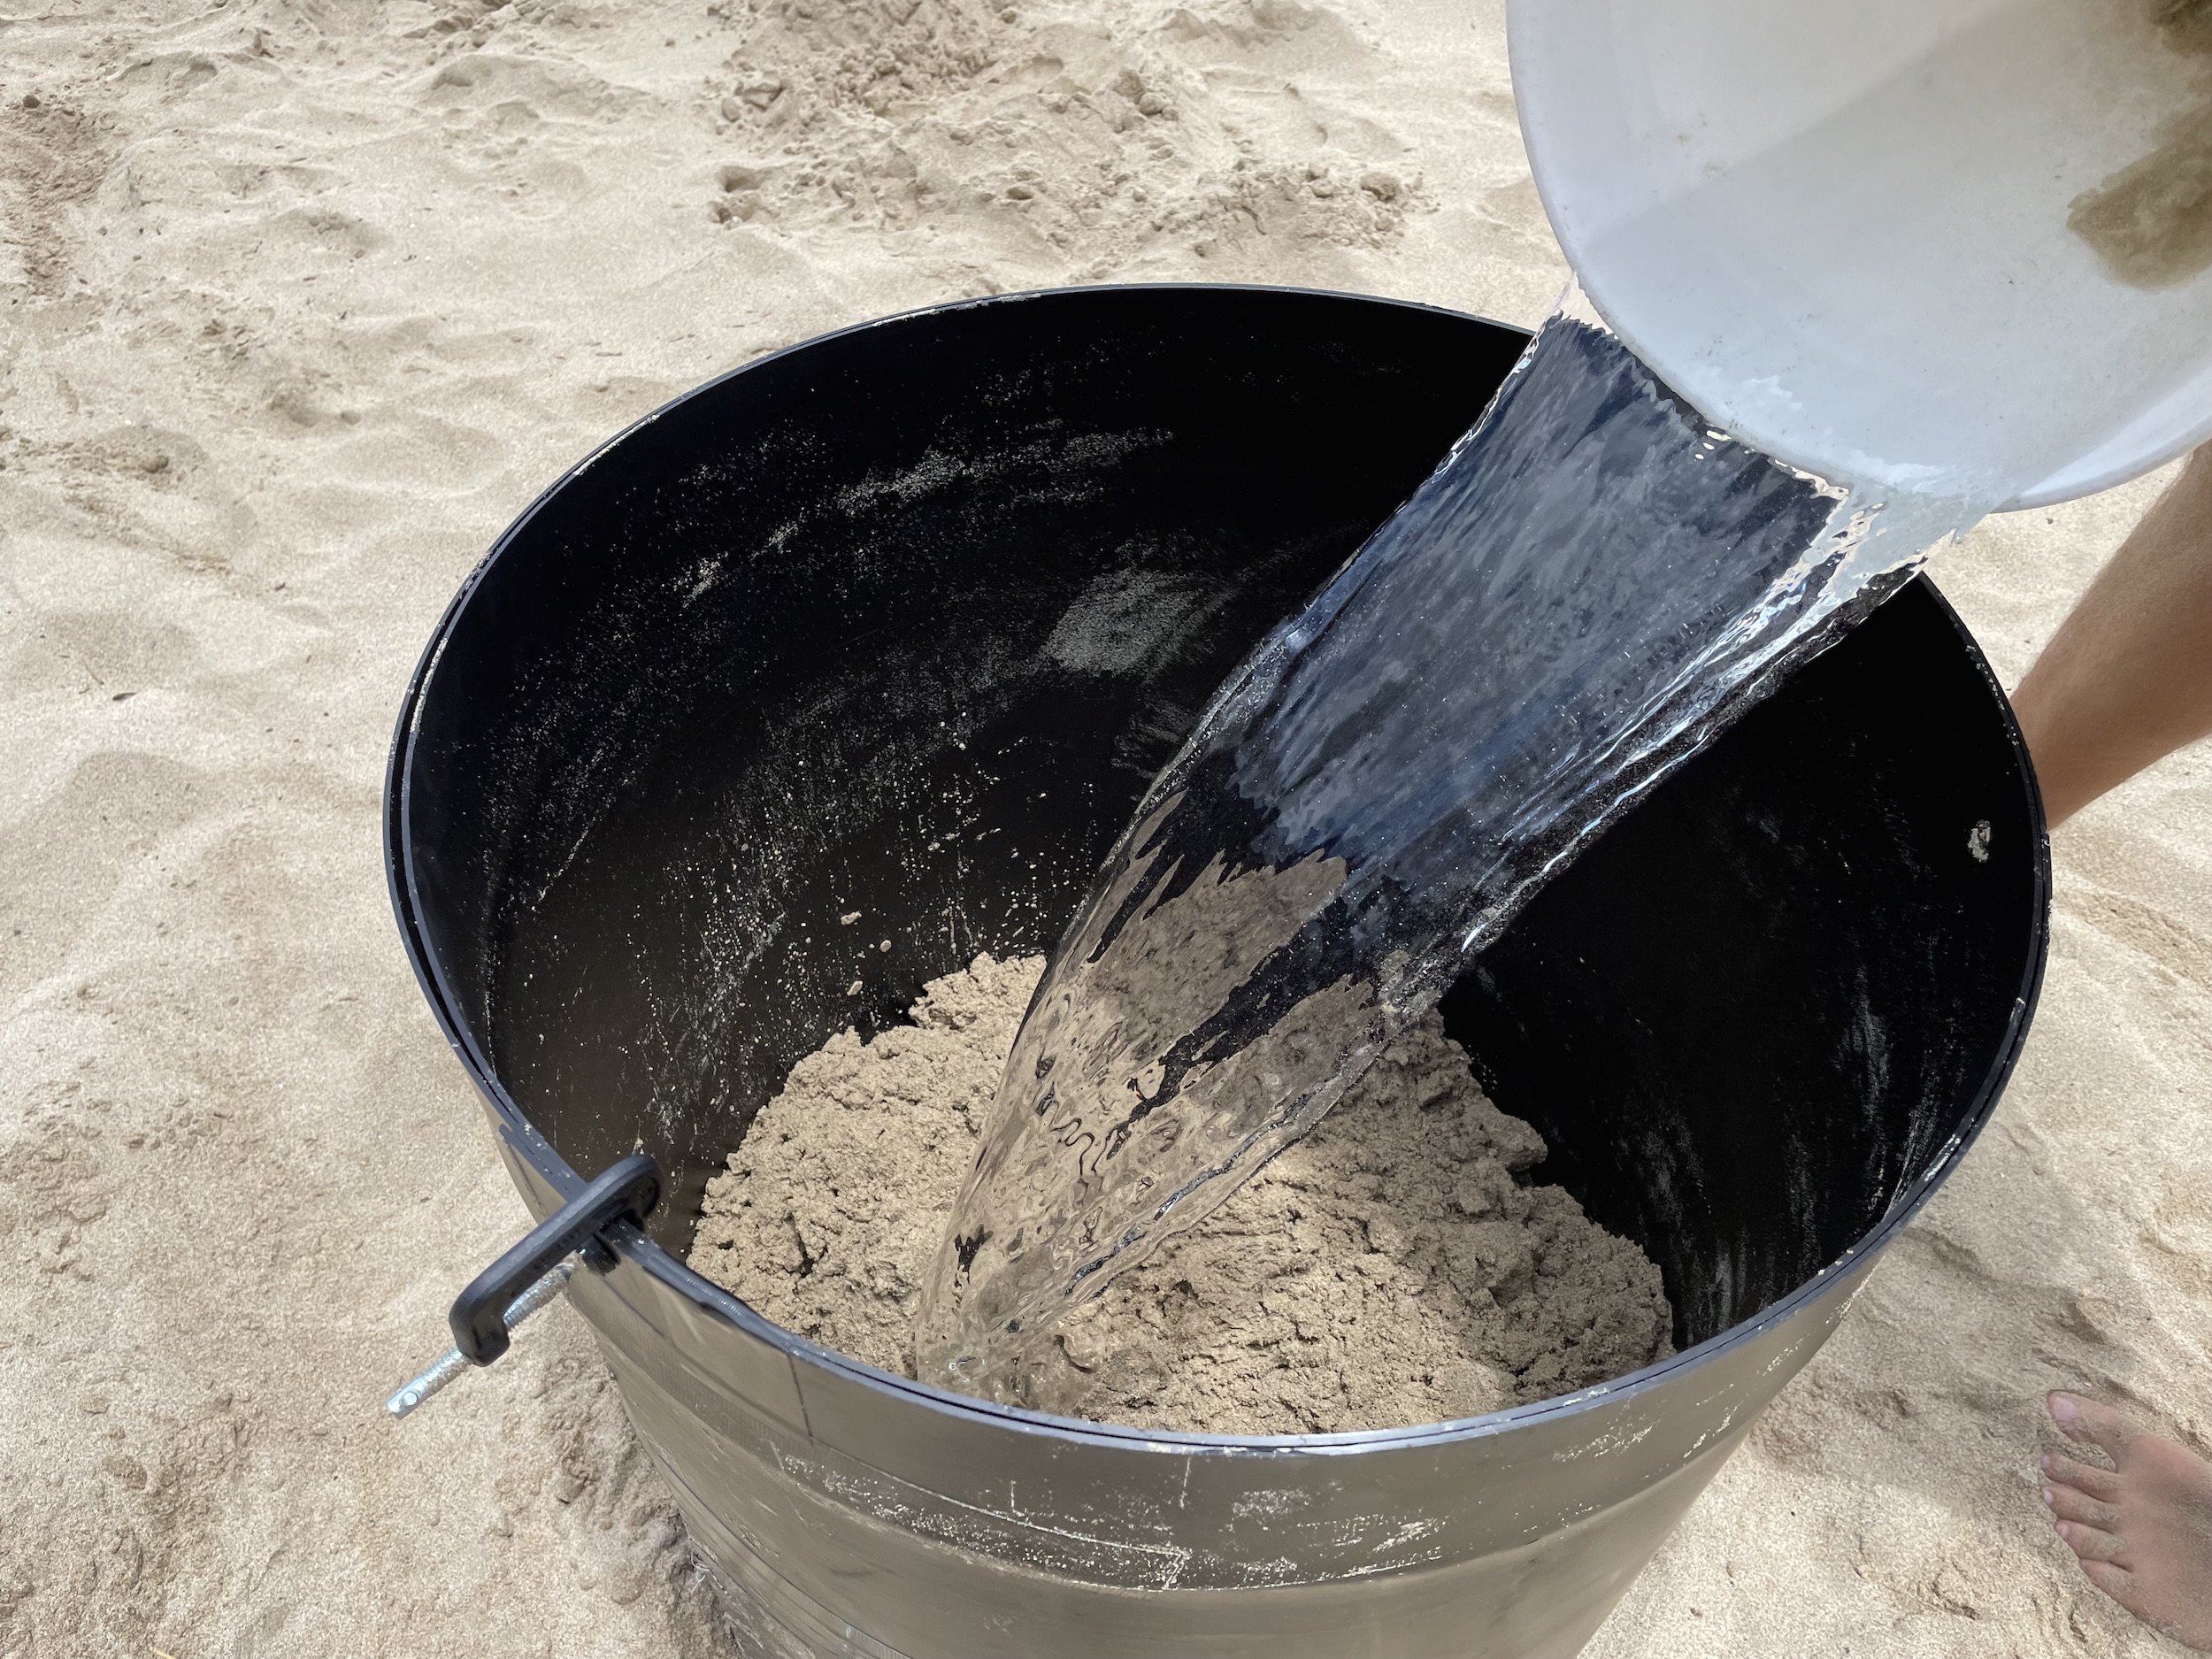 How to use sand and water to create a sand castle